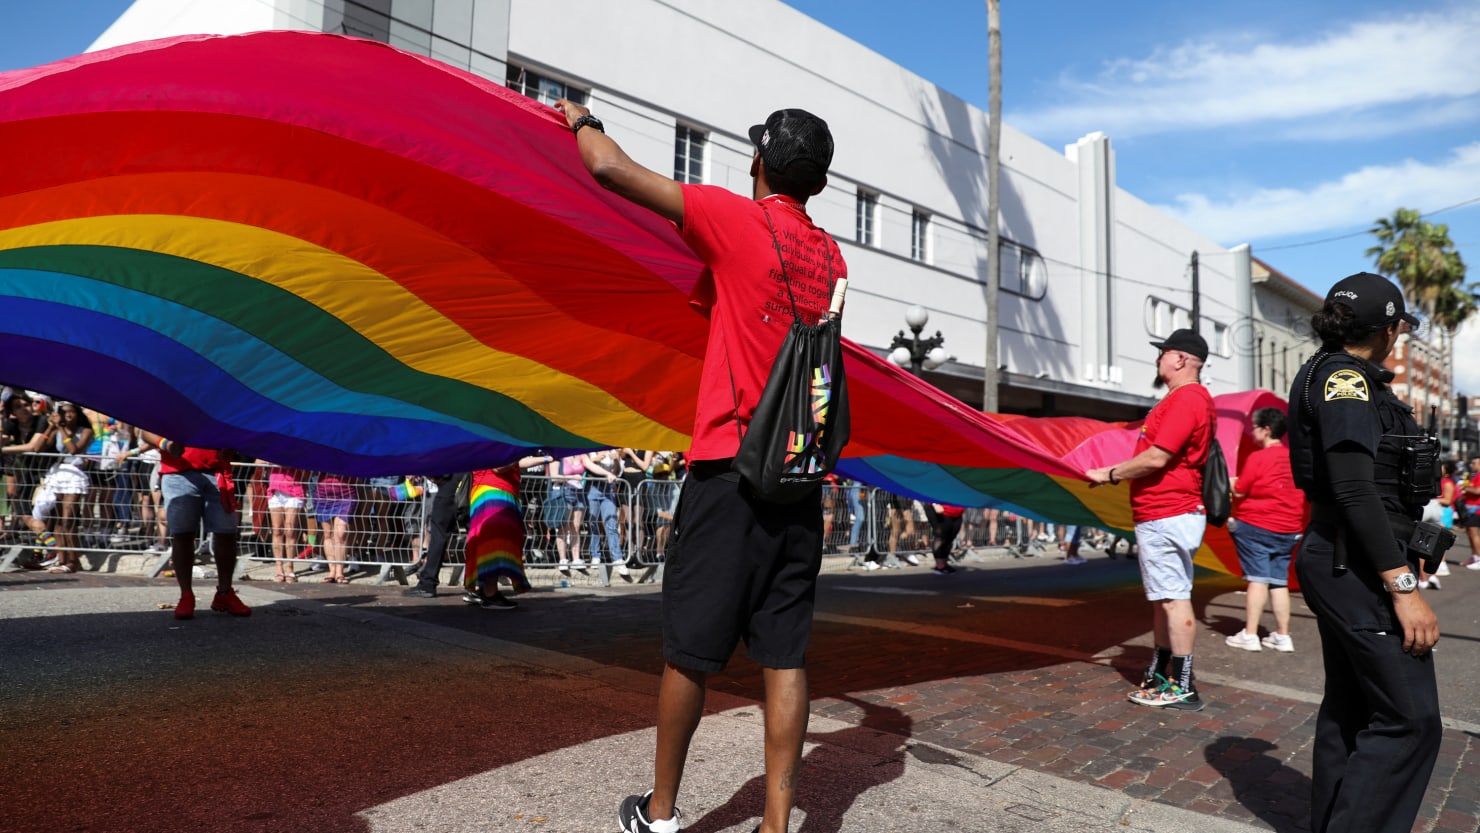 Lgbtq Advocacy Group Human Rights Campaign Advises Against Travel To Florida